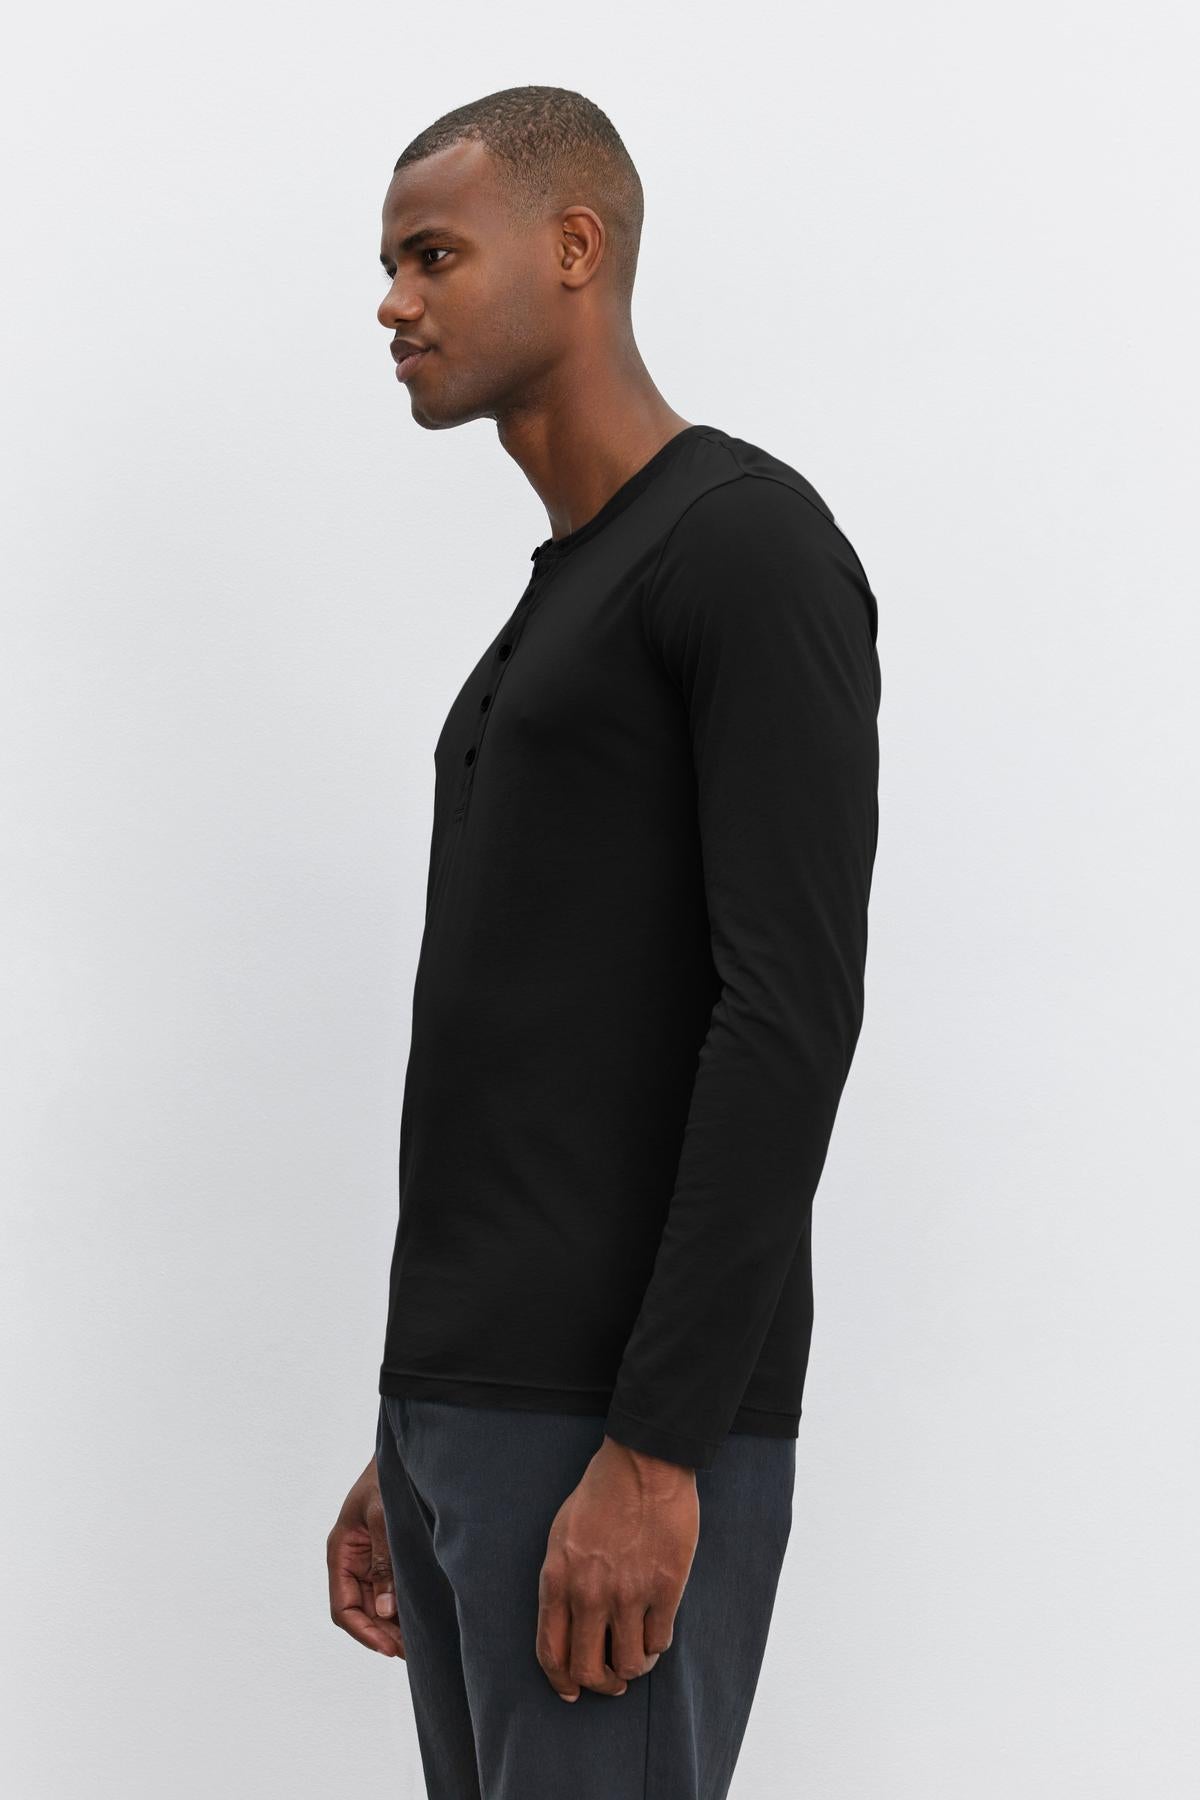   A man wearing a black lightweight ALVARO HENLEY by Velvet by Graham & Spencer and dark trousers stands against a plain white background, looking to the left. 